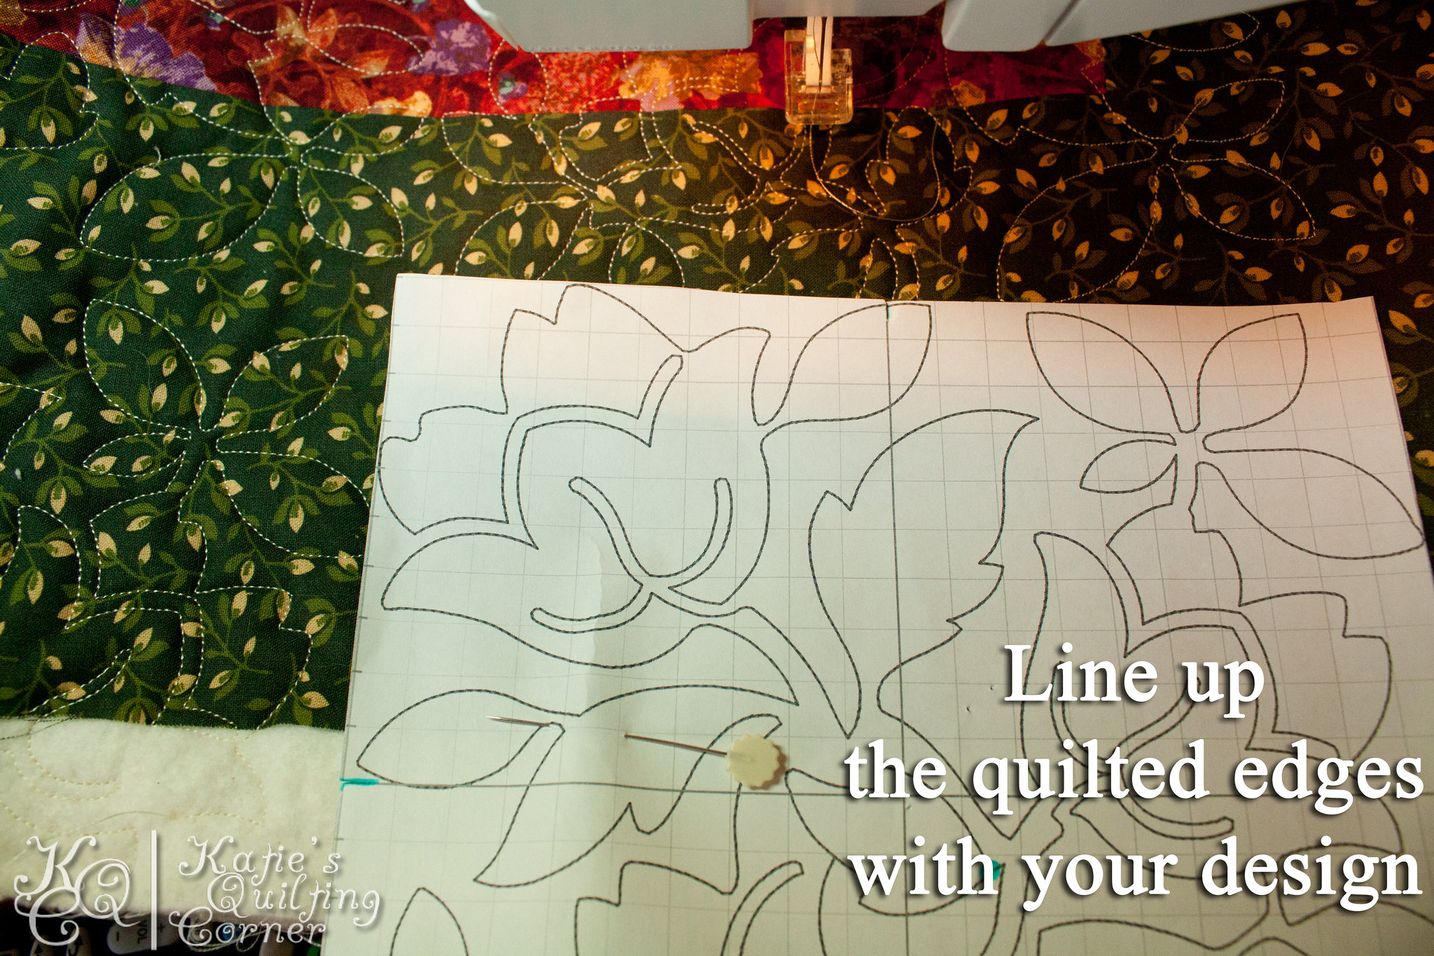 How to Quilt using your embroidery machine